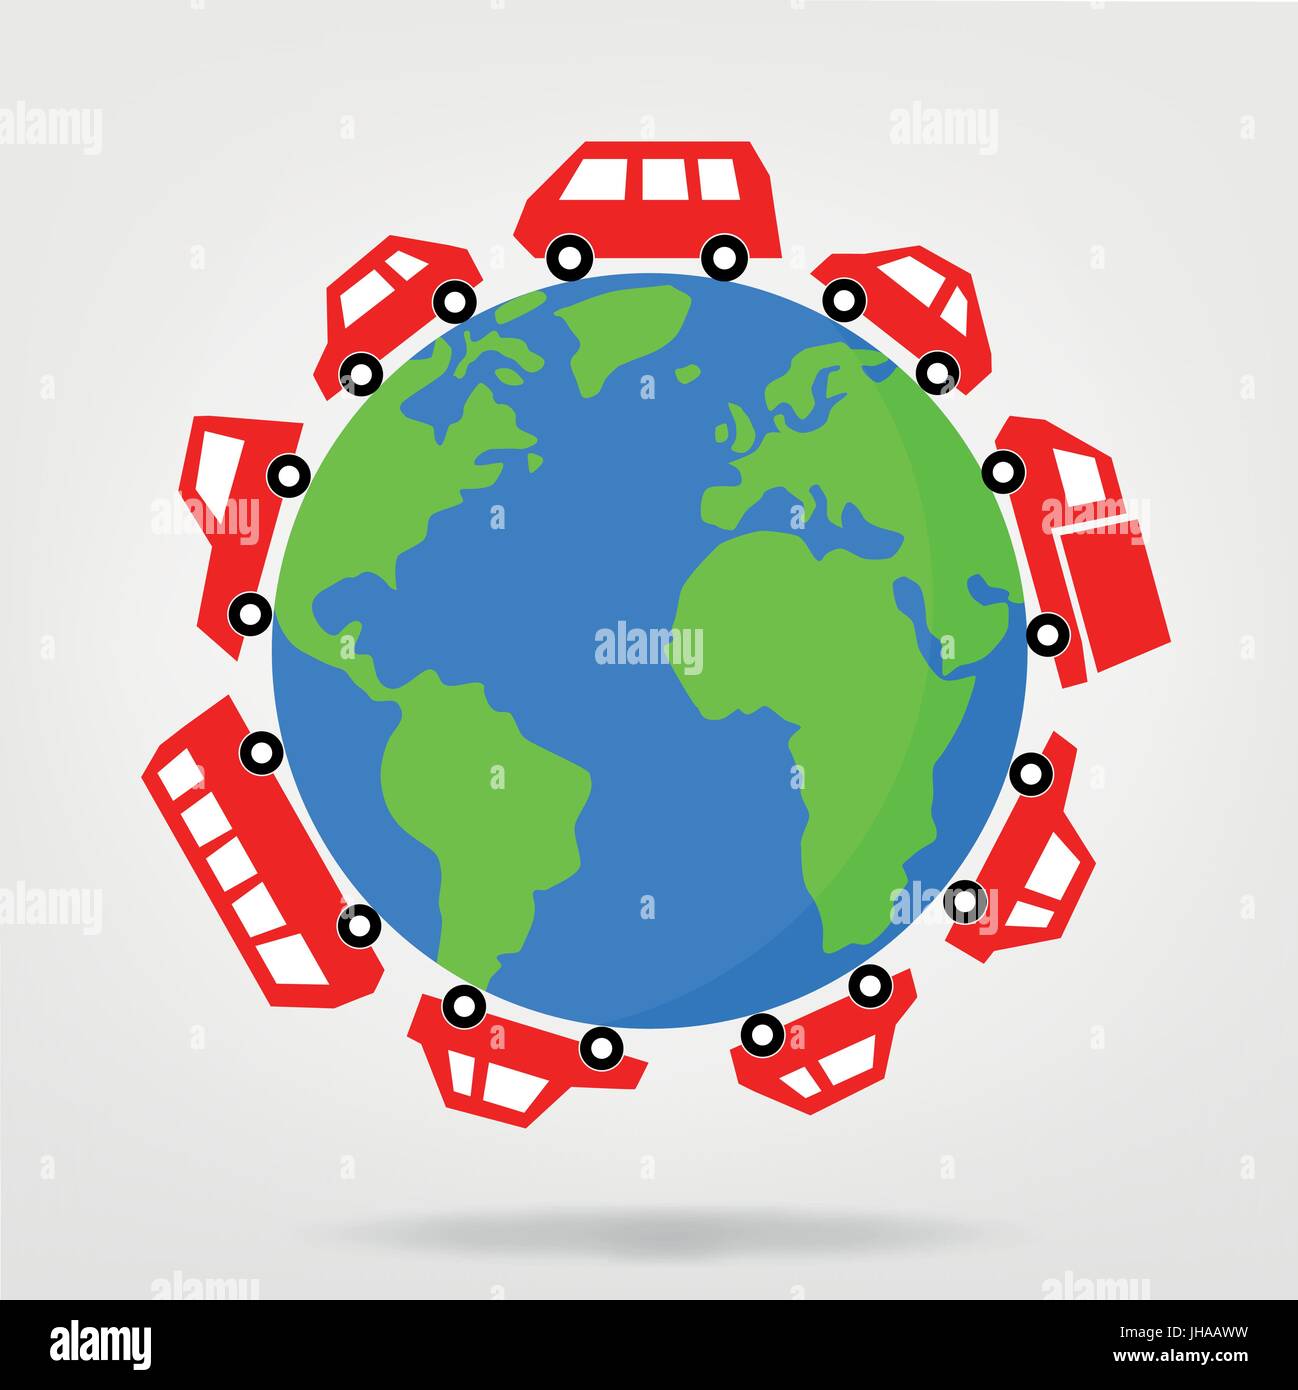 illustration of cars driving around the world vector graphic Stock Photo